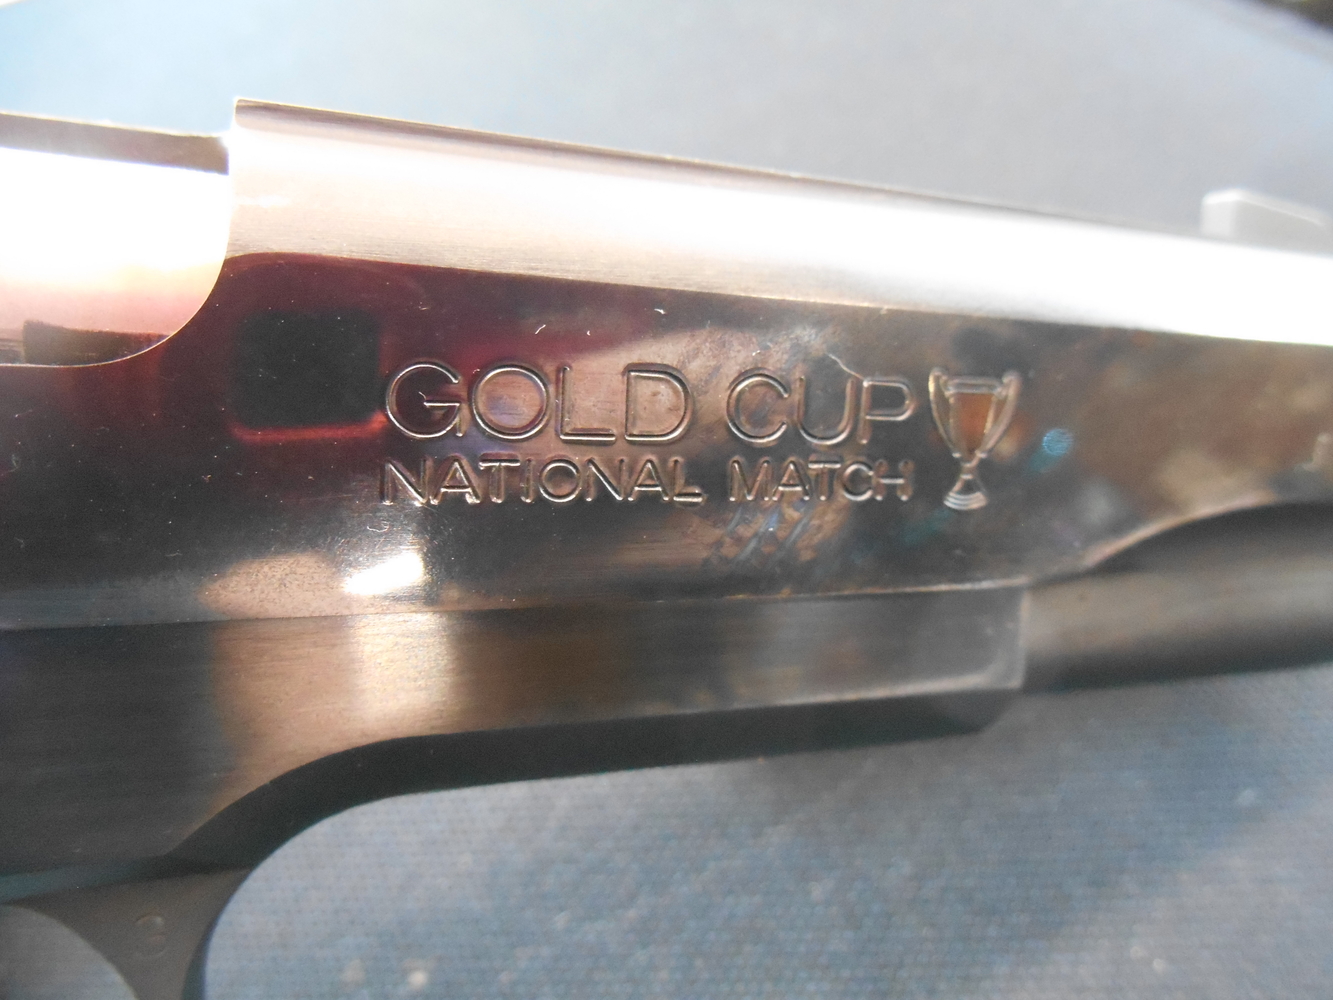 Colt 1911 Series 80 .45 1990 Blued 5in Gold Cup National Match Pistol